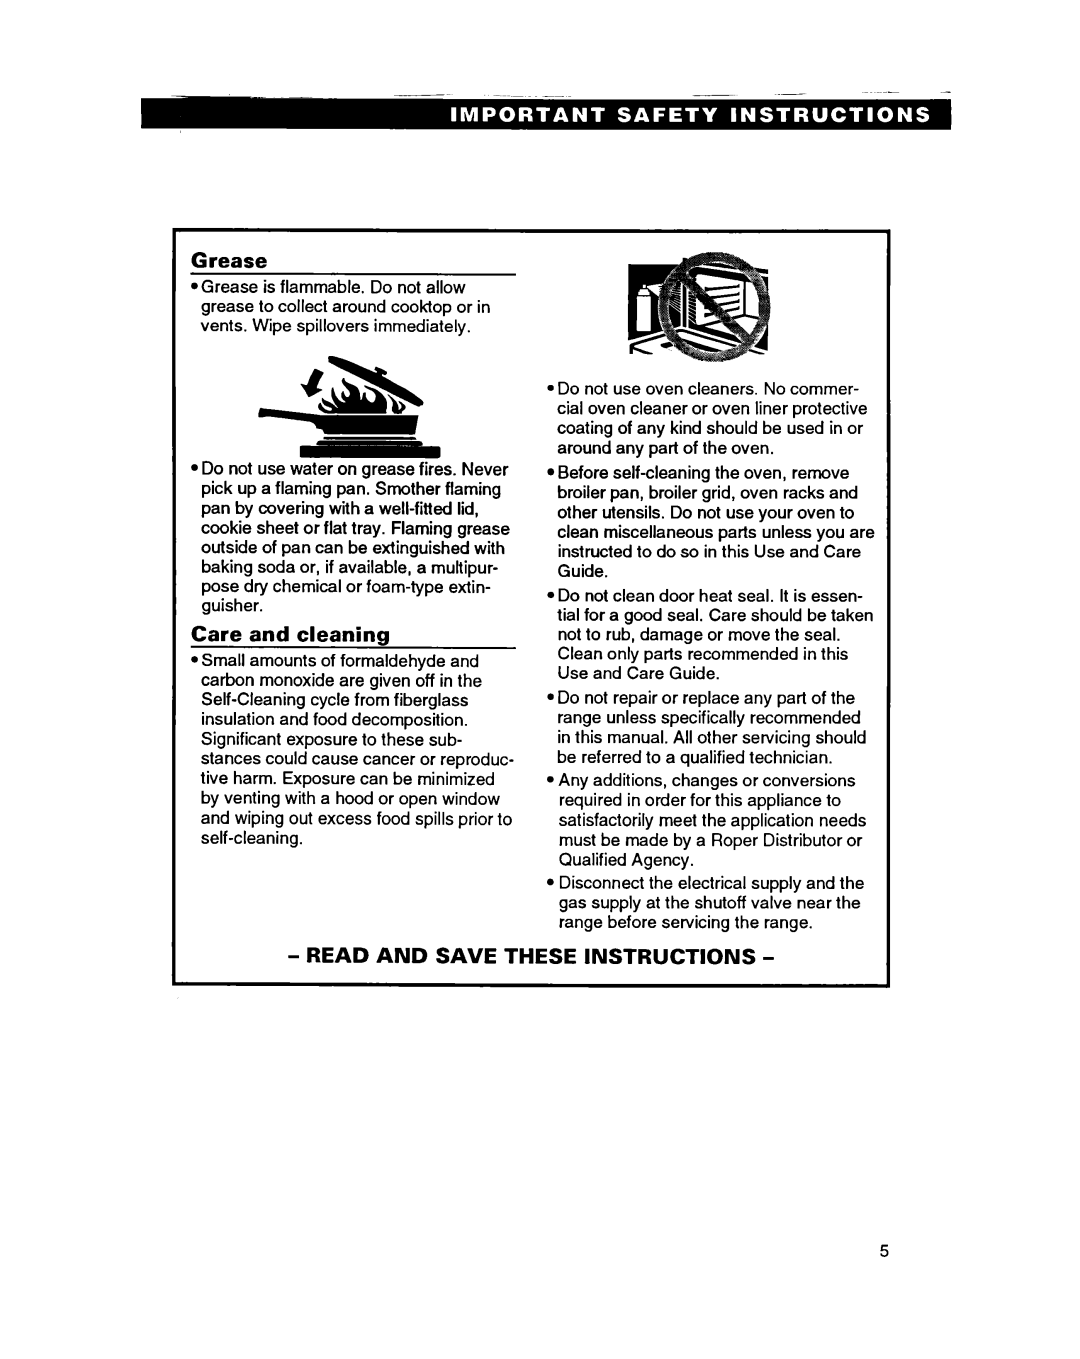 Roper FGS395B important safety instructions Grease, Care and cleaning, Read And Save These Instructions 